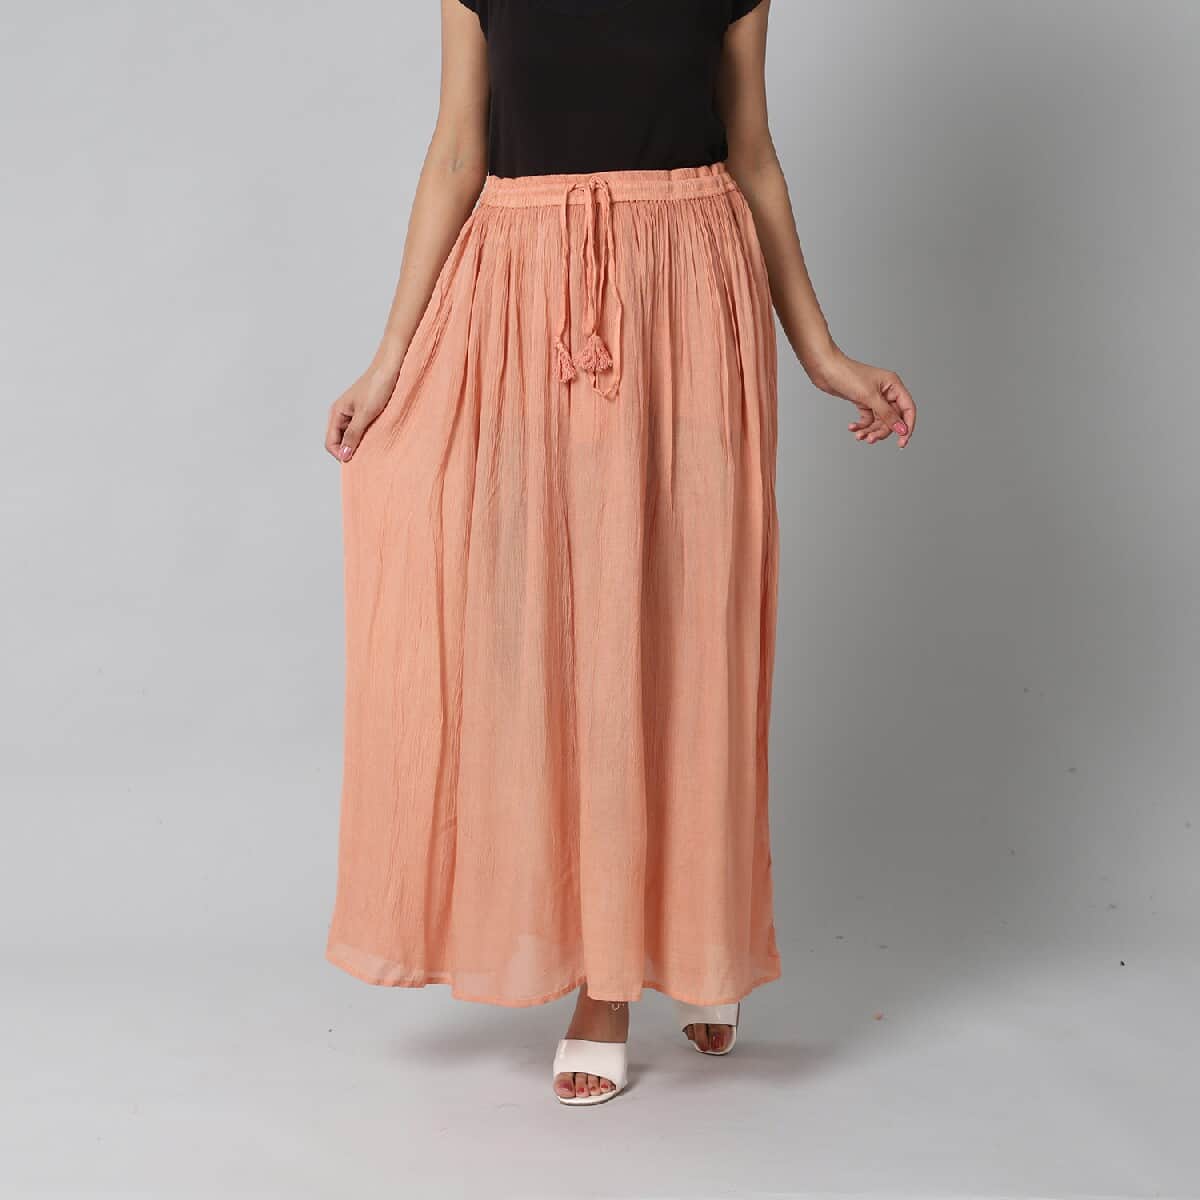 JOVIE Blush 2-Way Solid Skirt Dress (One Size Fits Most) image number 0